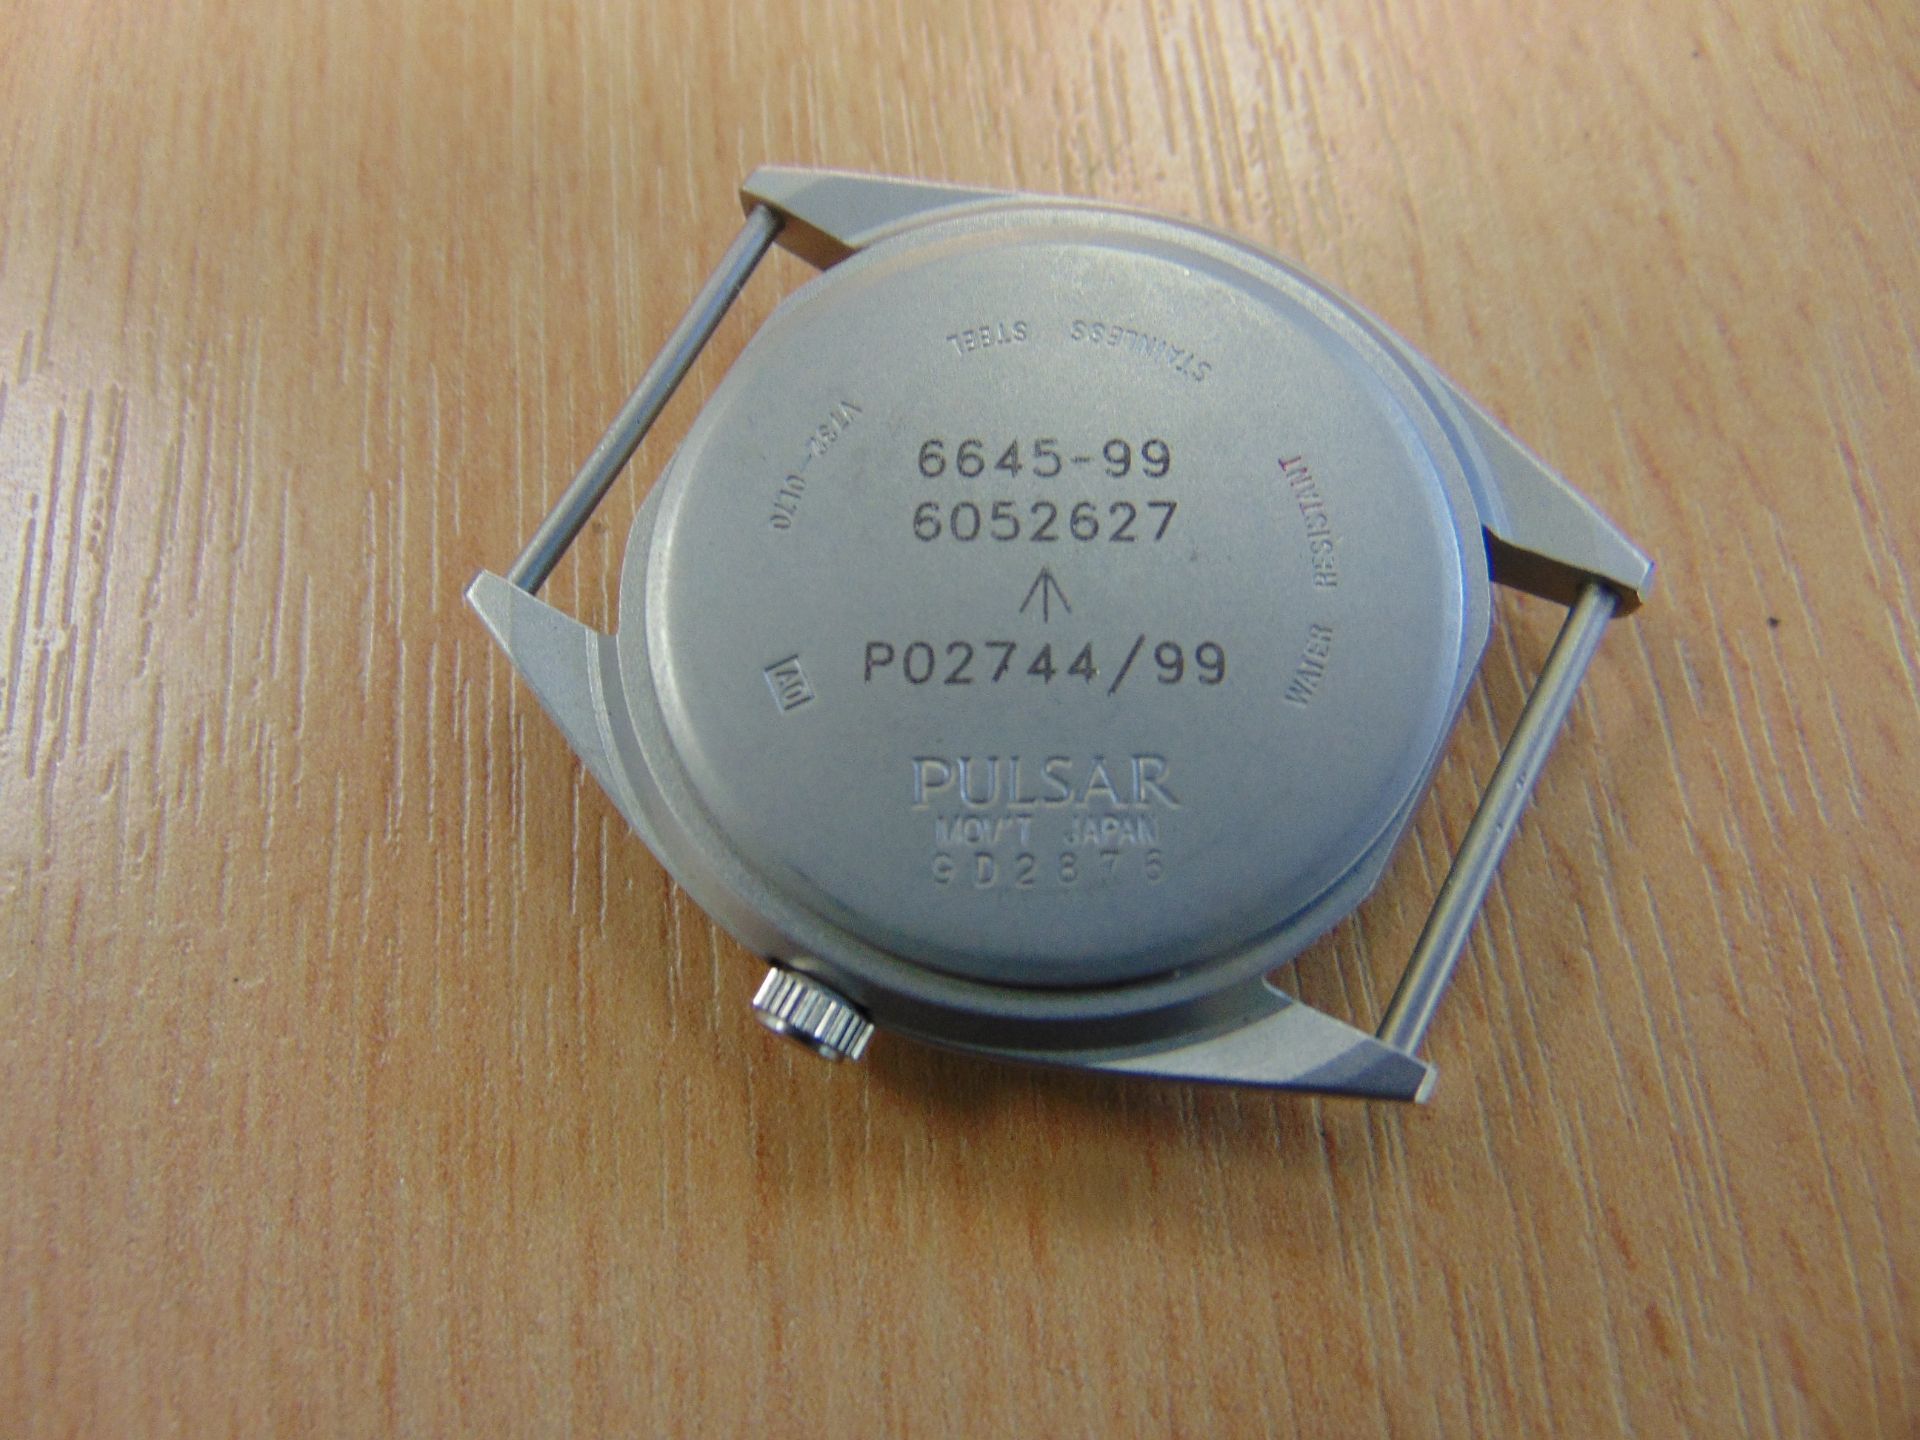 UNISSUED PULSAR W10 SERVICE WATCH NATO MARKED DATED 1999 ORIGINAL STRAP AND NEW BATTERY - Image 8 of 12